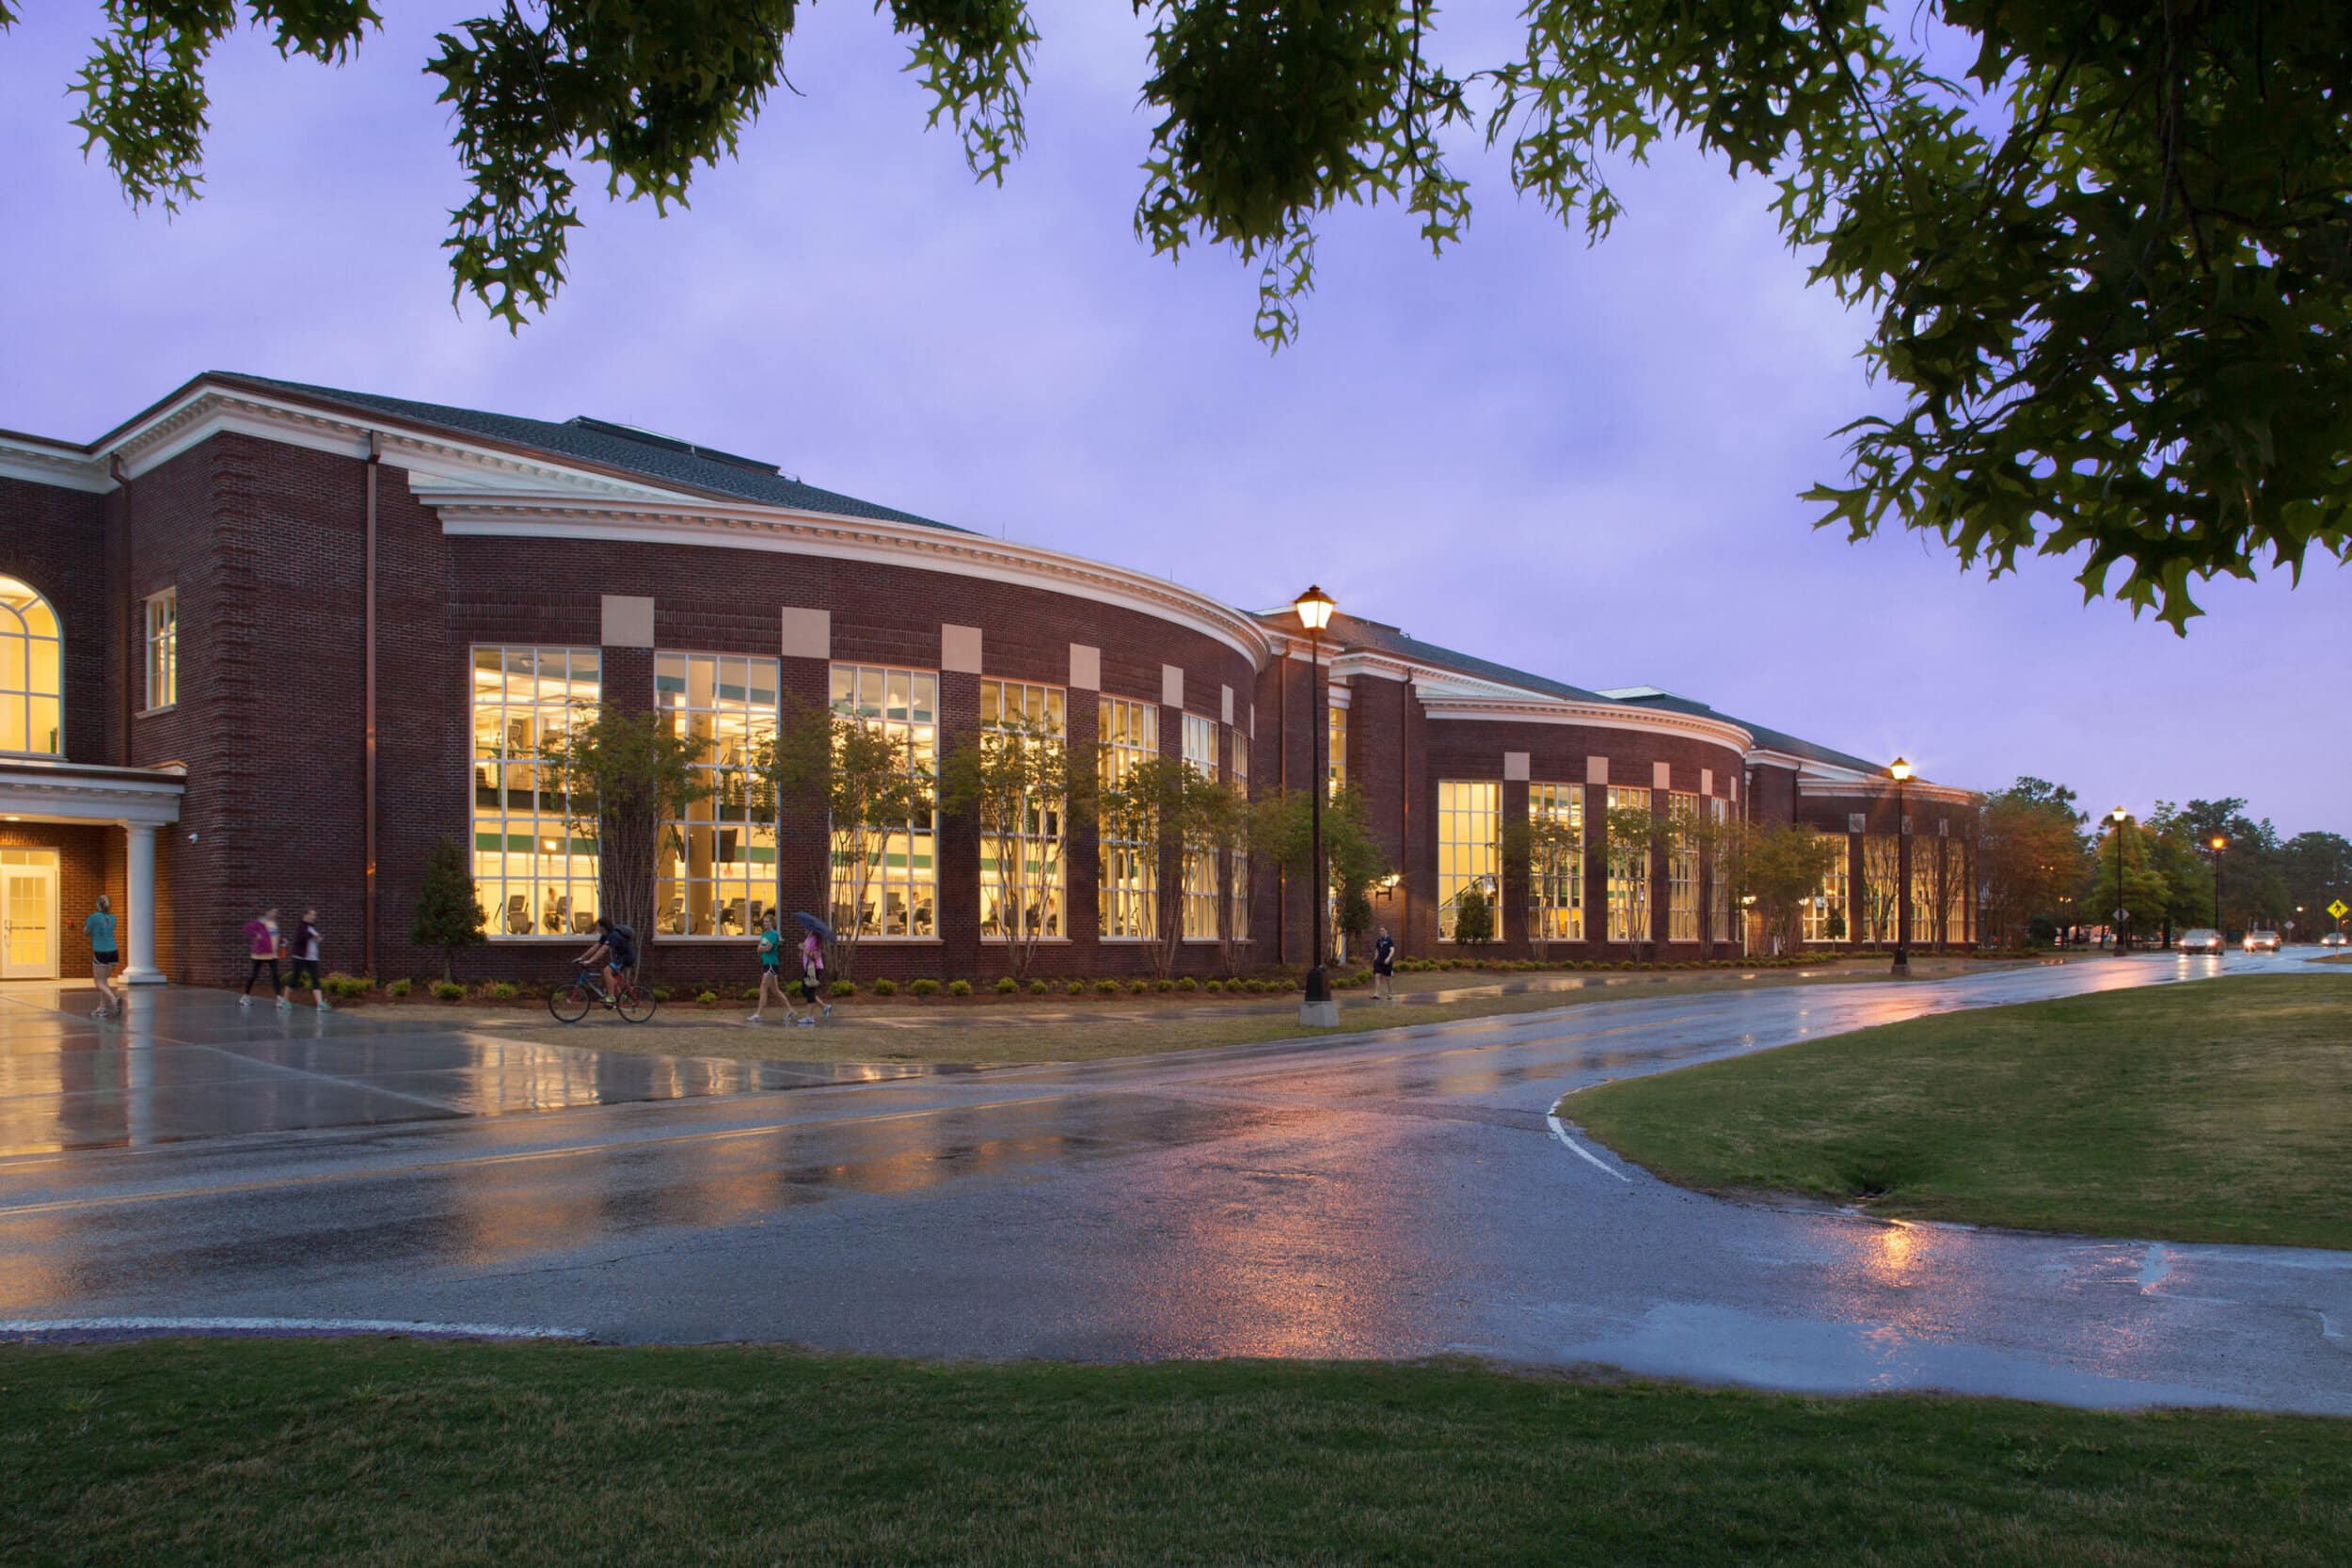 UNCW Student Rec Center Featured as AB’s Facility of the Week